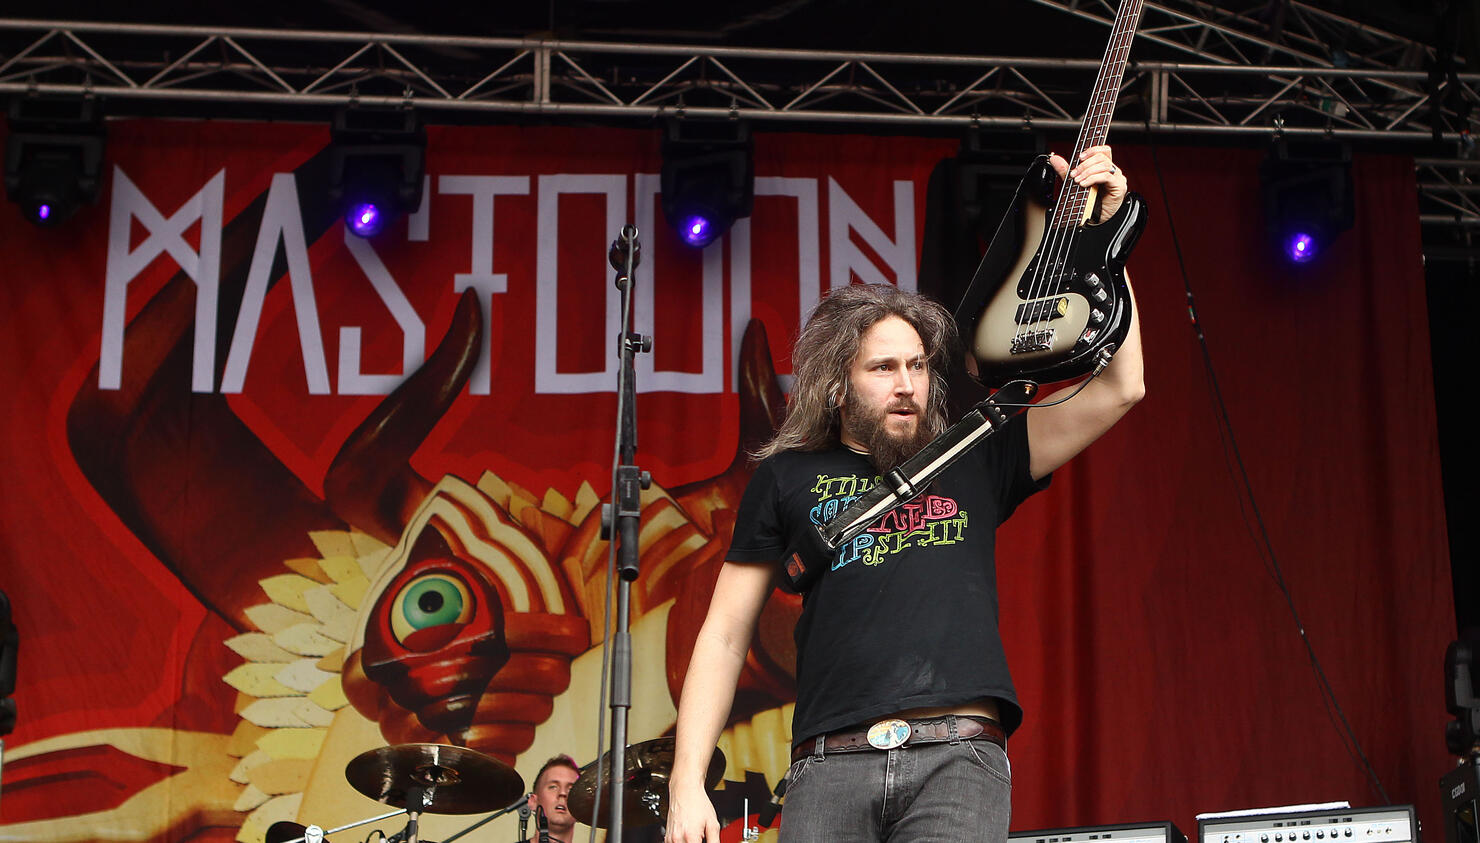 Mastodon Cancels Tour Due to "Critical Situation" Involving Band Family